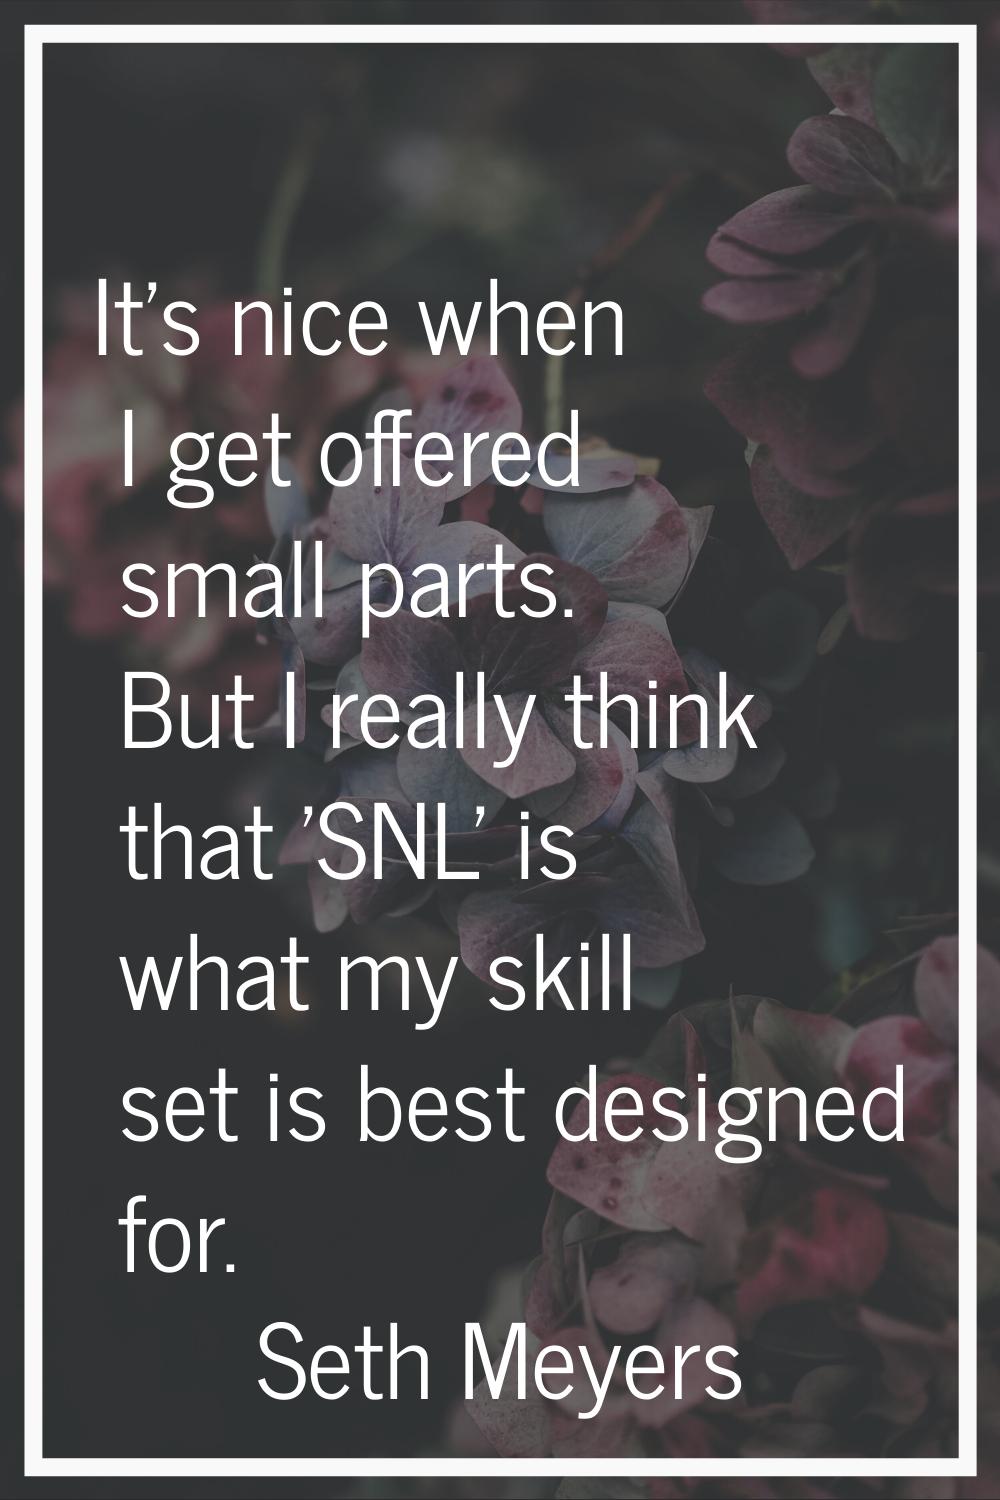 It's nice when I get offered small parts. But I really think that 'SNL' is what my skill set is bes